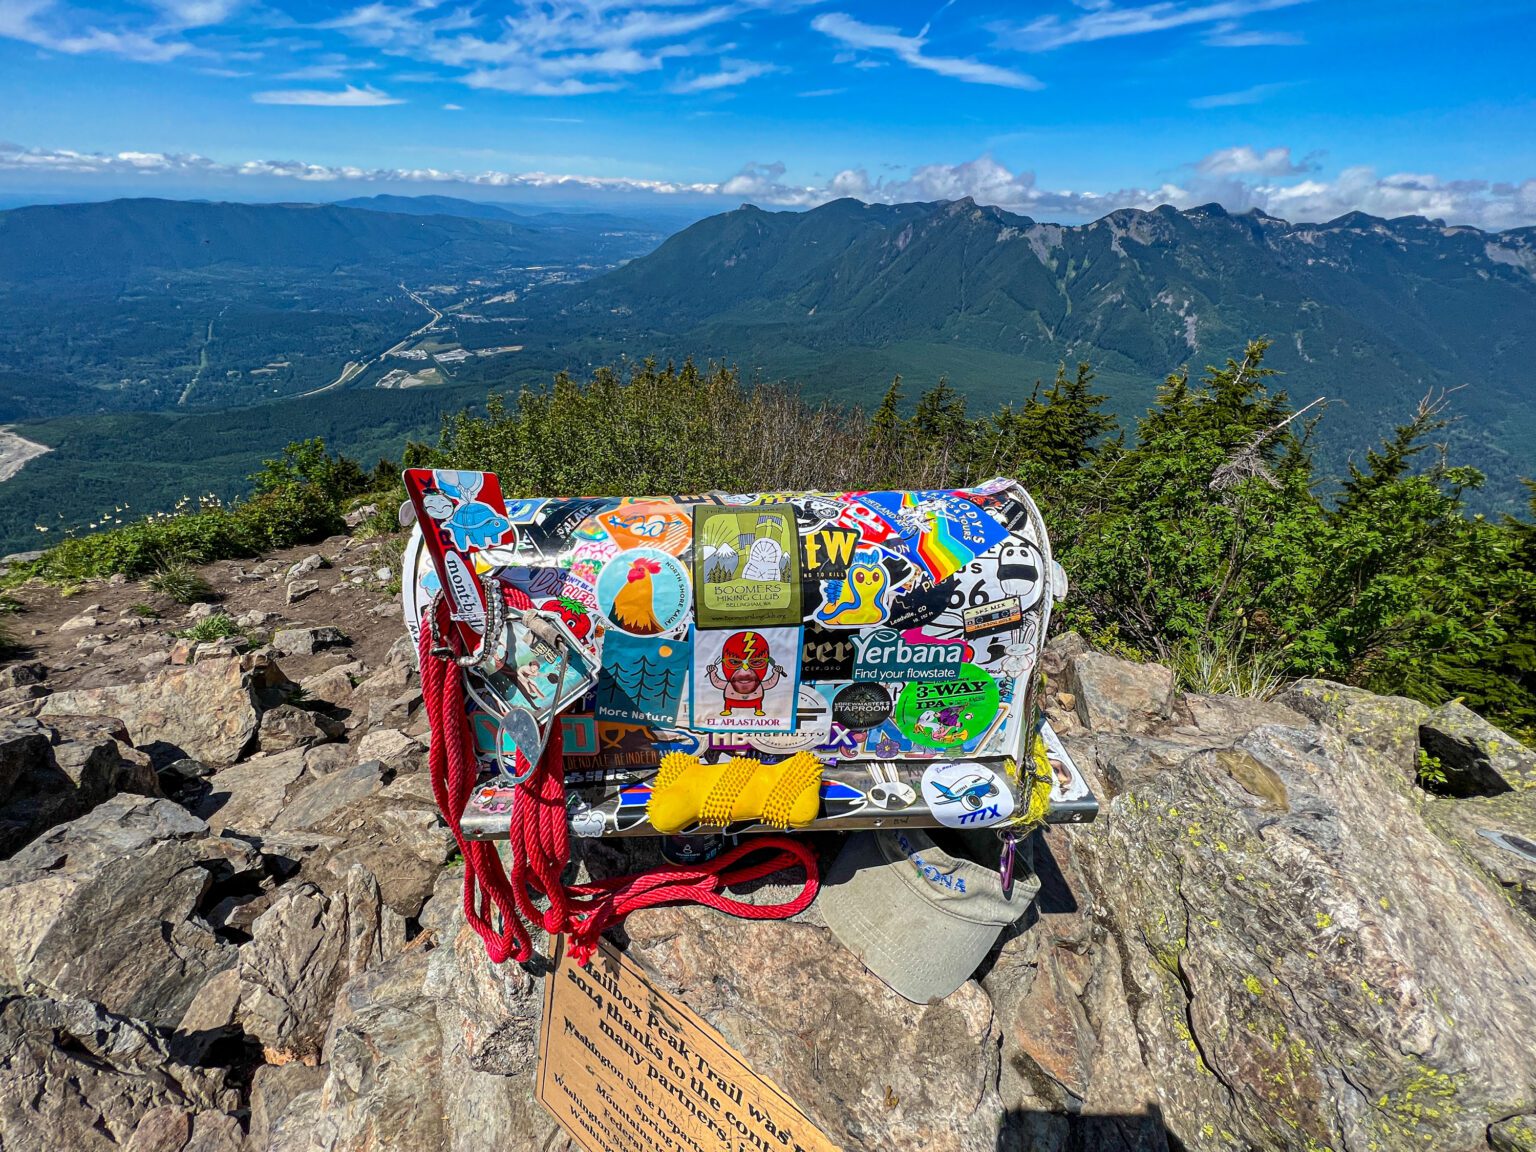 The famed mailbox is the prime attraction on an 11.4-mile hike.  Seattle postal carrier Carl Heine lugged the original mailbox to the top in 1960 as a makeshift registry.